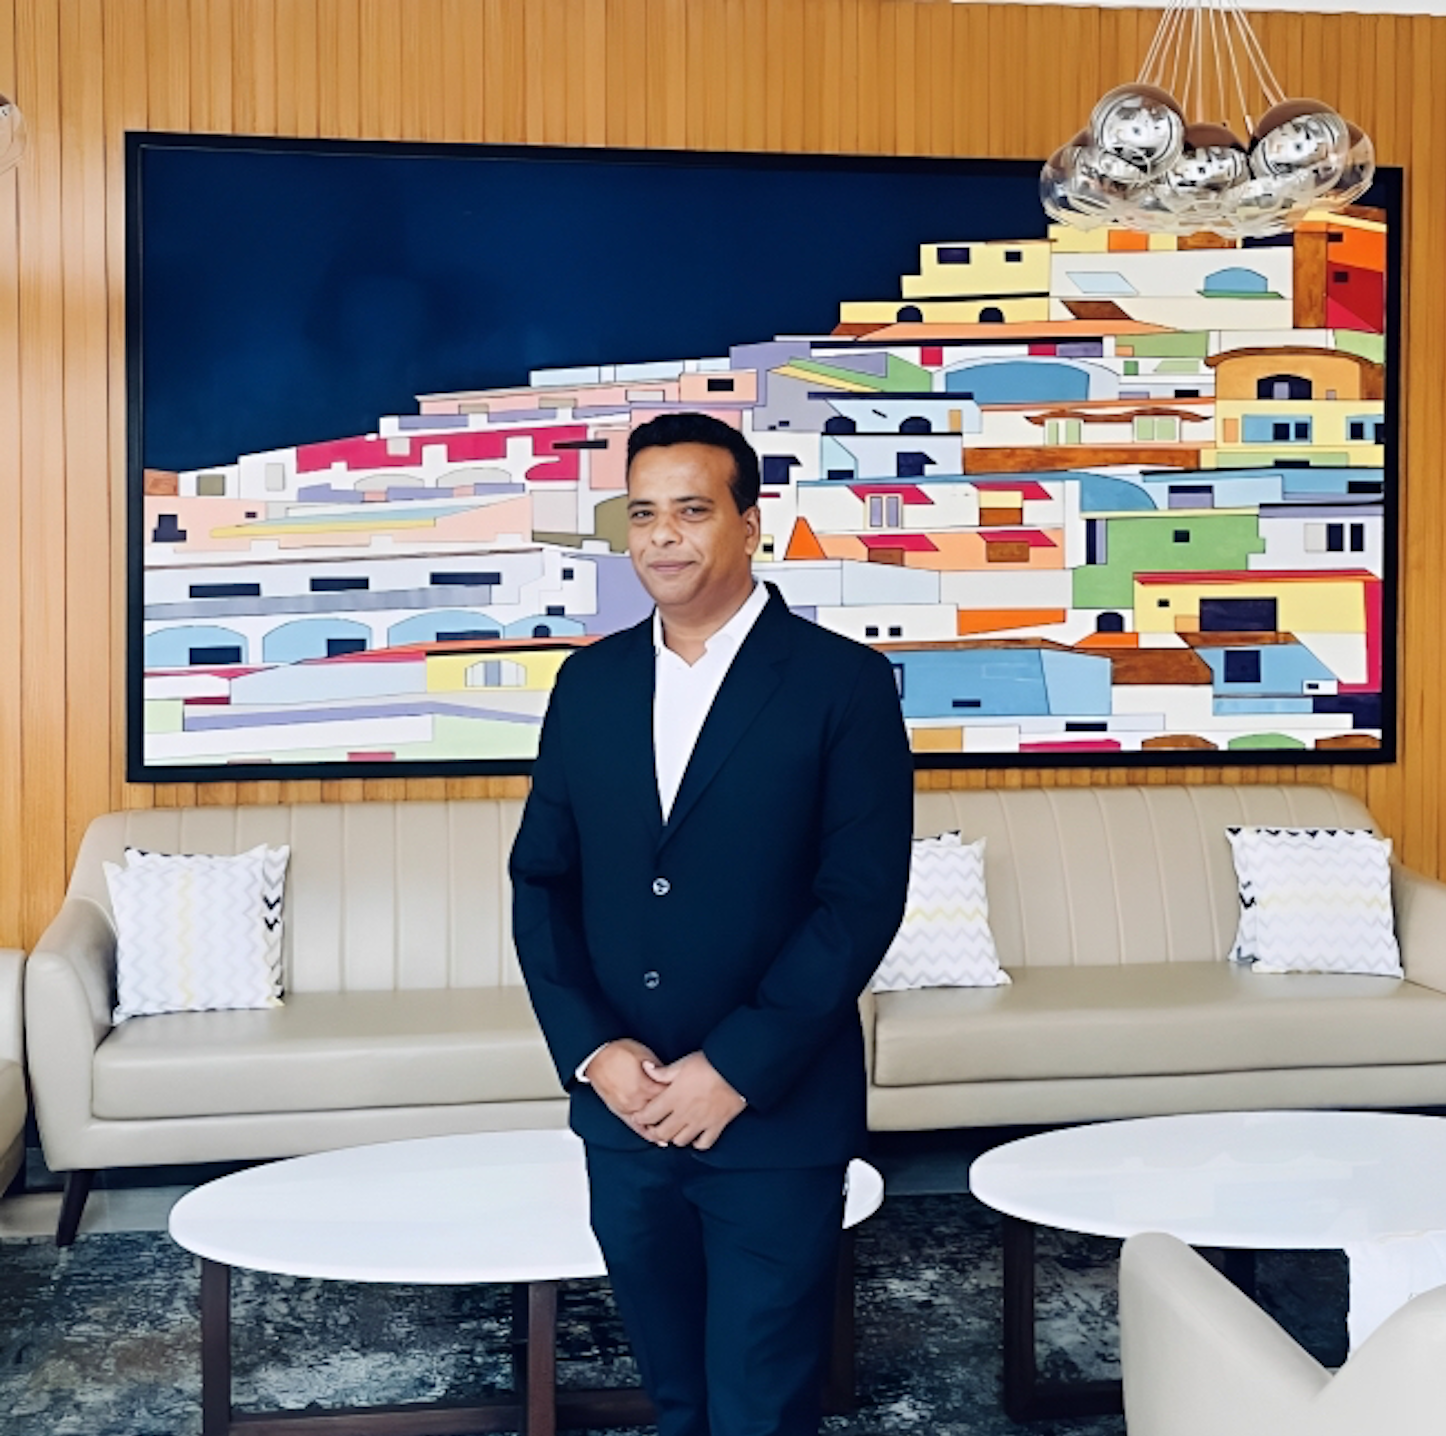 Kumar Manish Appointed as General Manager at The Fern Residency, Mundra 